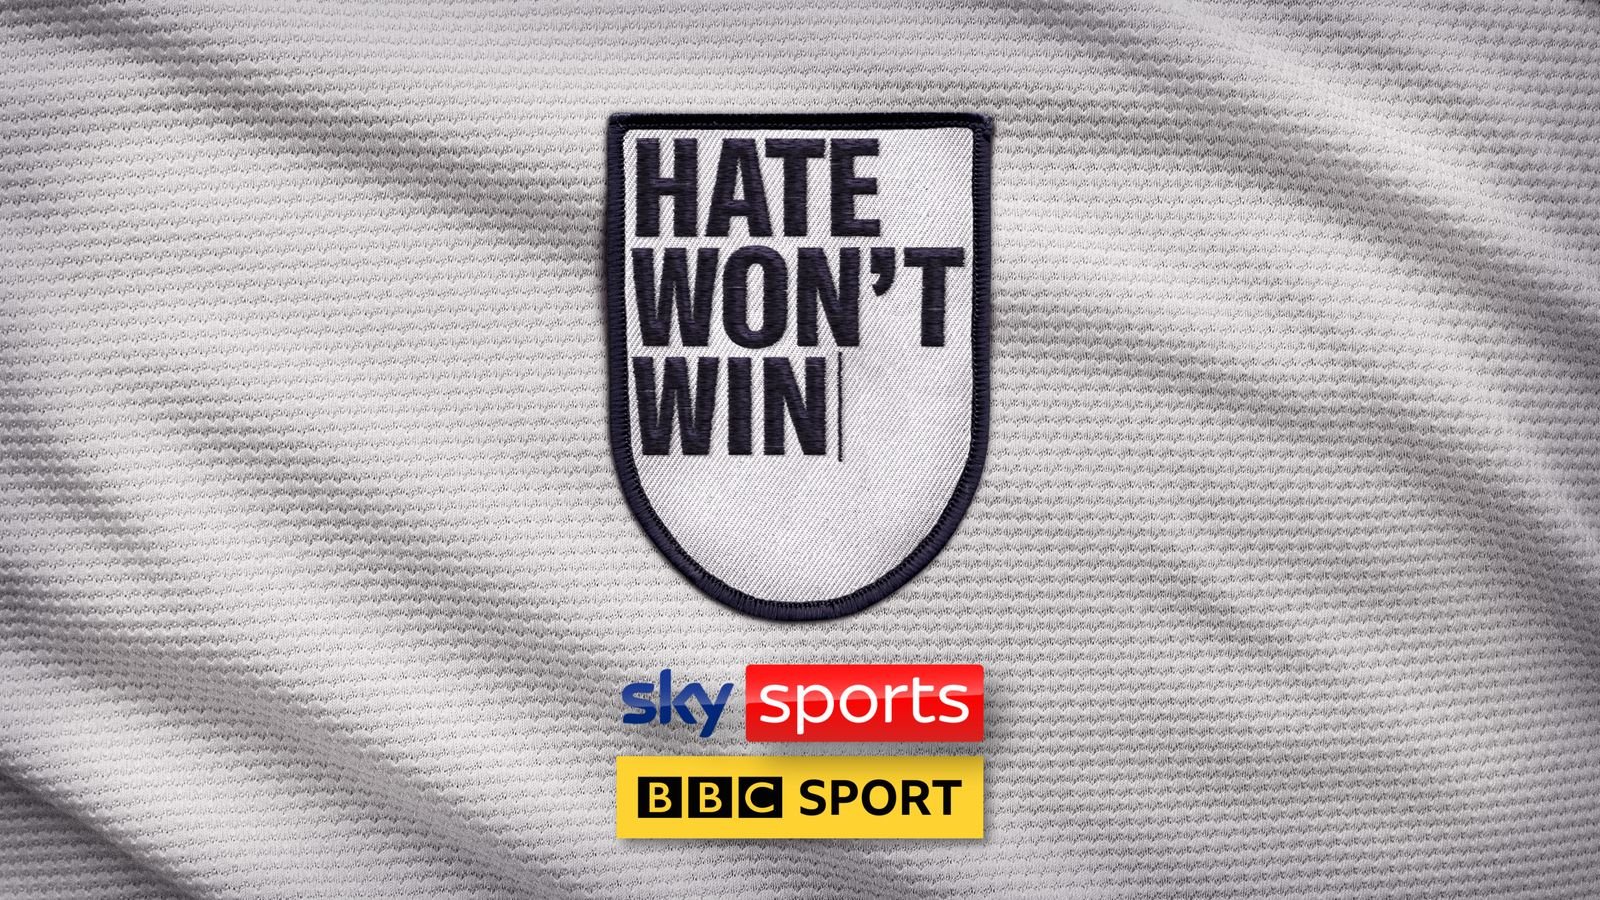 Sky Sports and BBC Sport stars unite to fight against online abuse in Hate Won't Win video